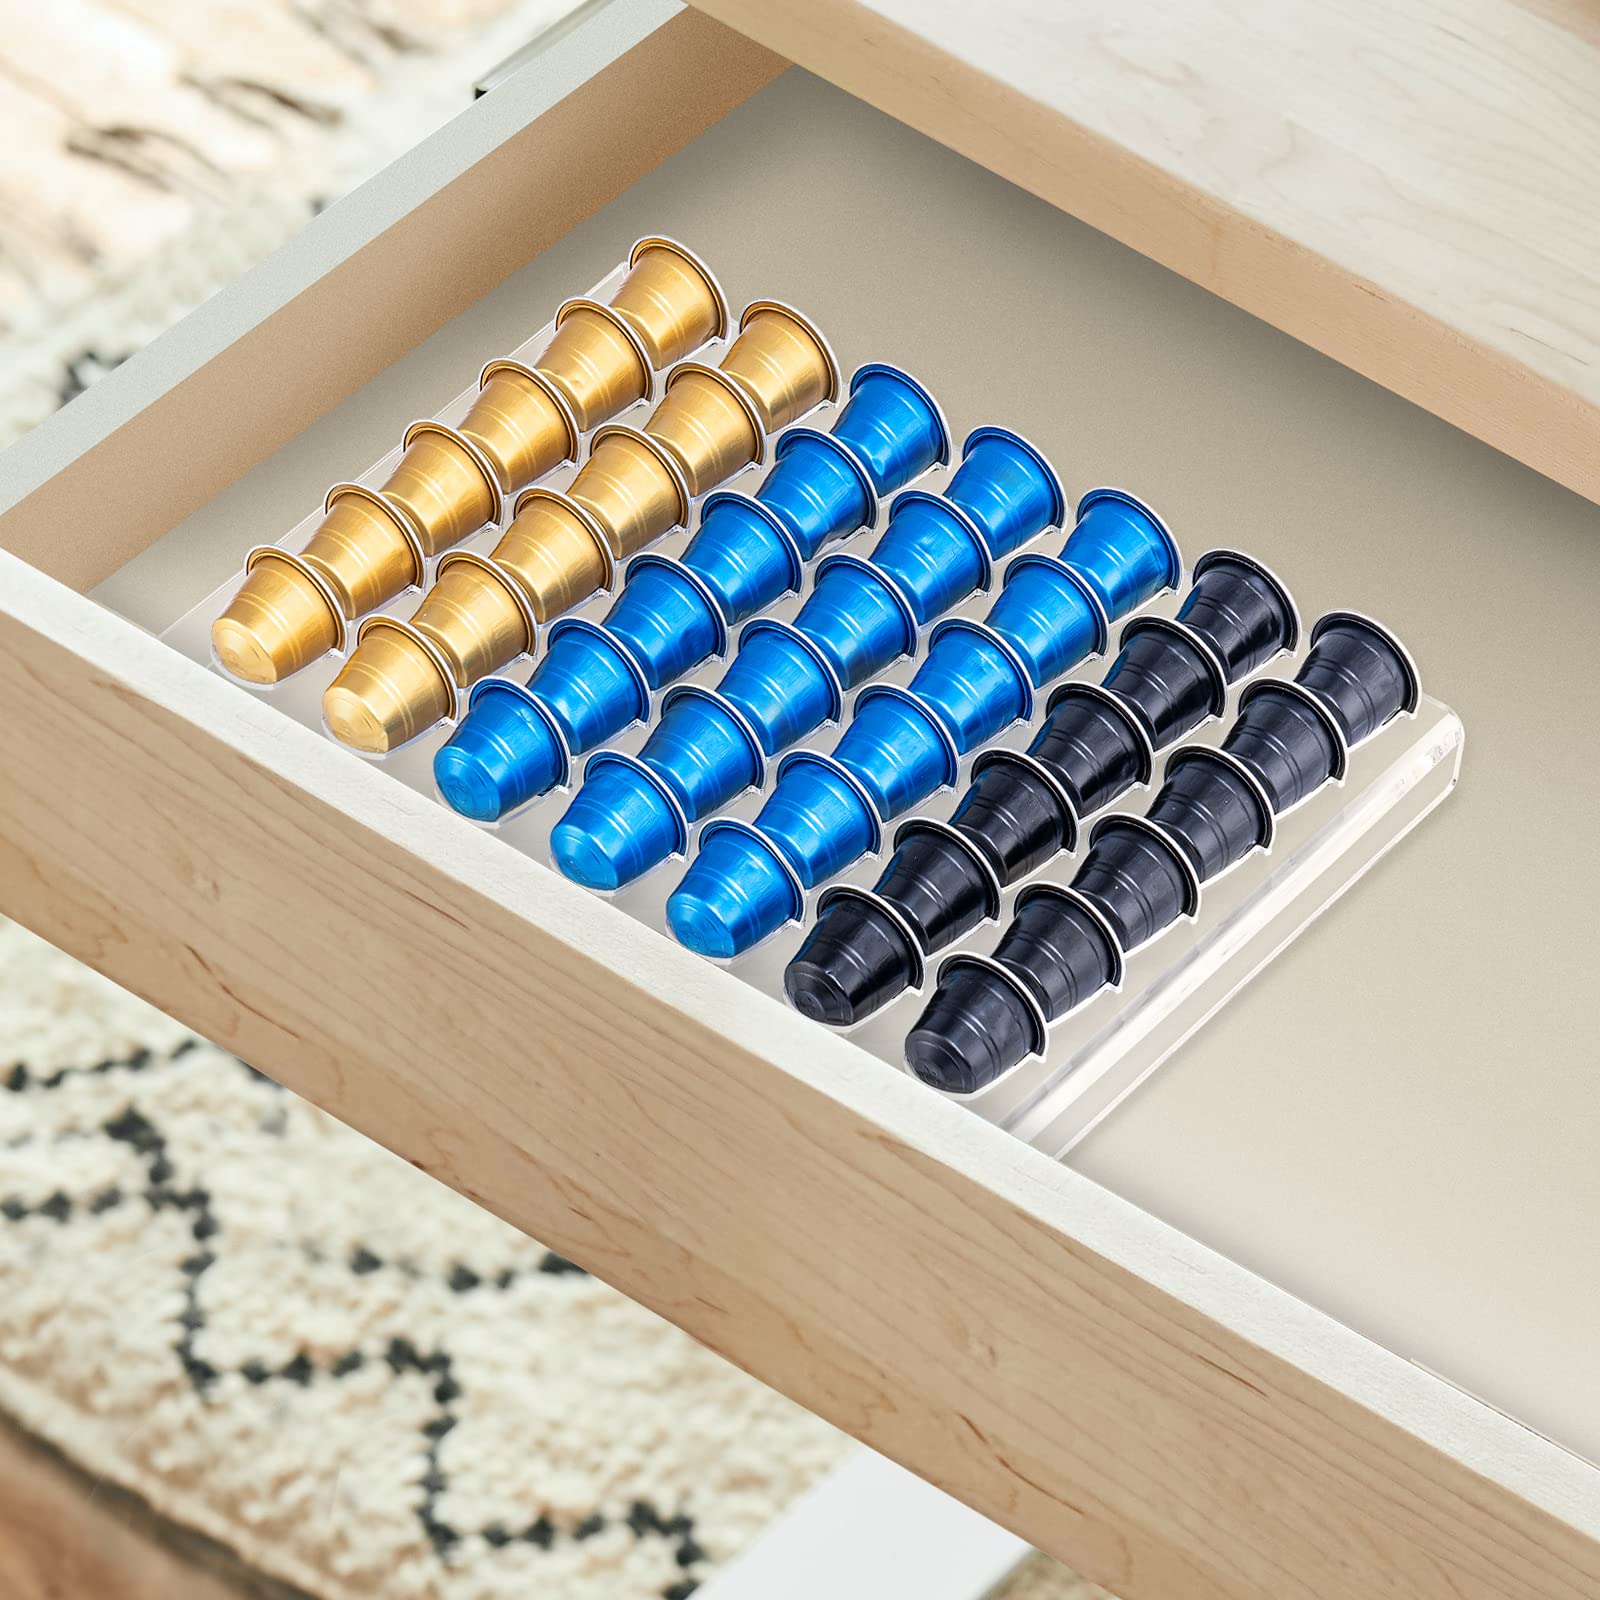 Sumerflos Coffee Pod Storage Organizer Tray Drawer, Holds 42 Capsules Compatible with Nespresso original pods Insert for Kitchen Home Office Capsule Drawer Capsule Holder and Organizer - Clear